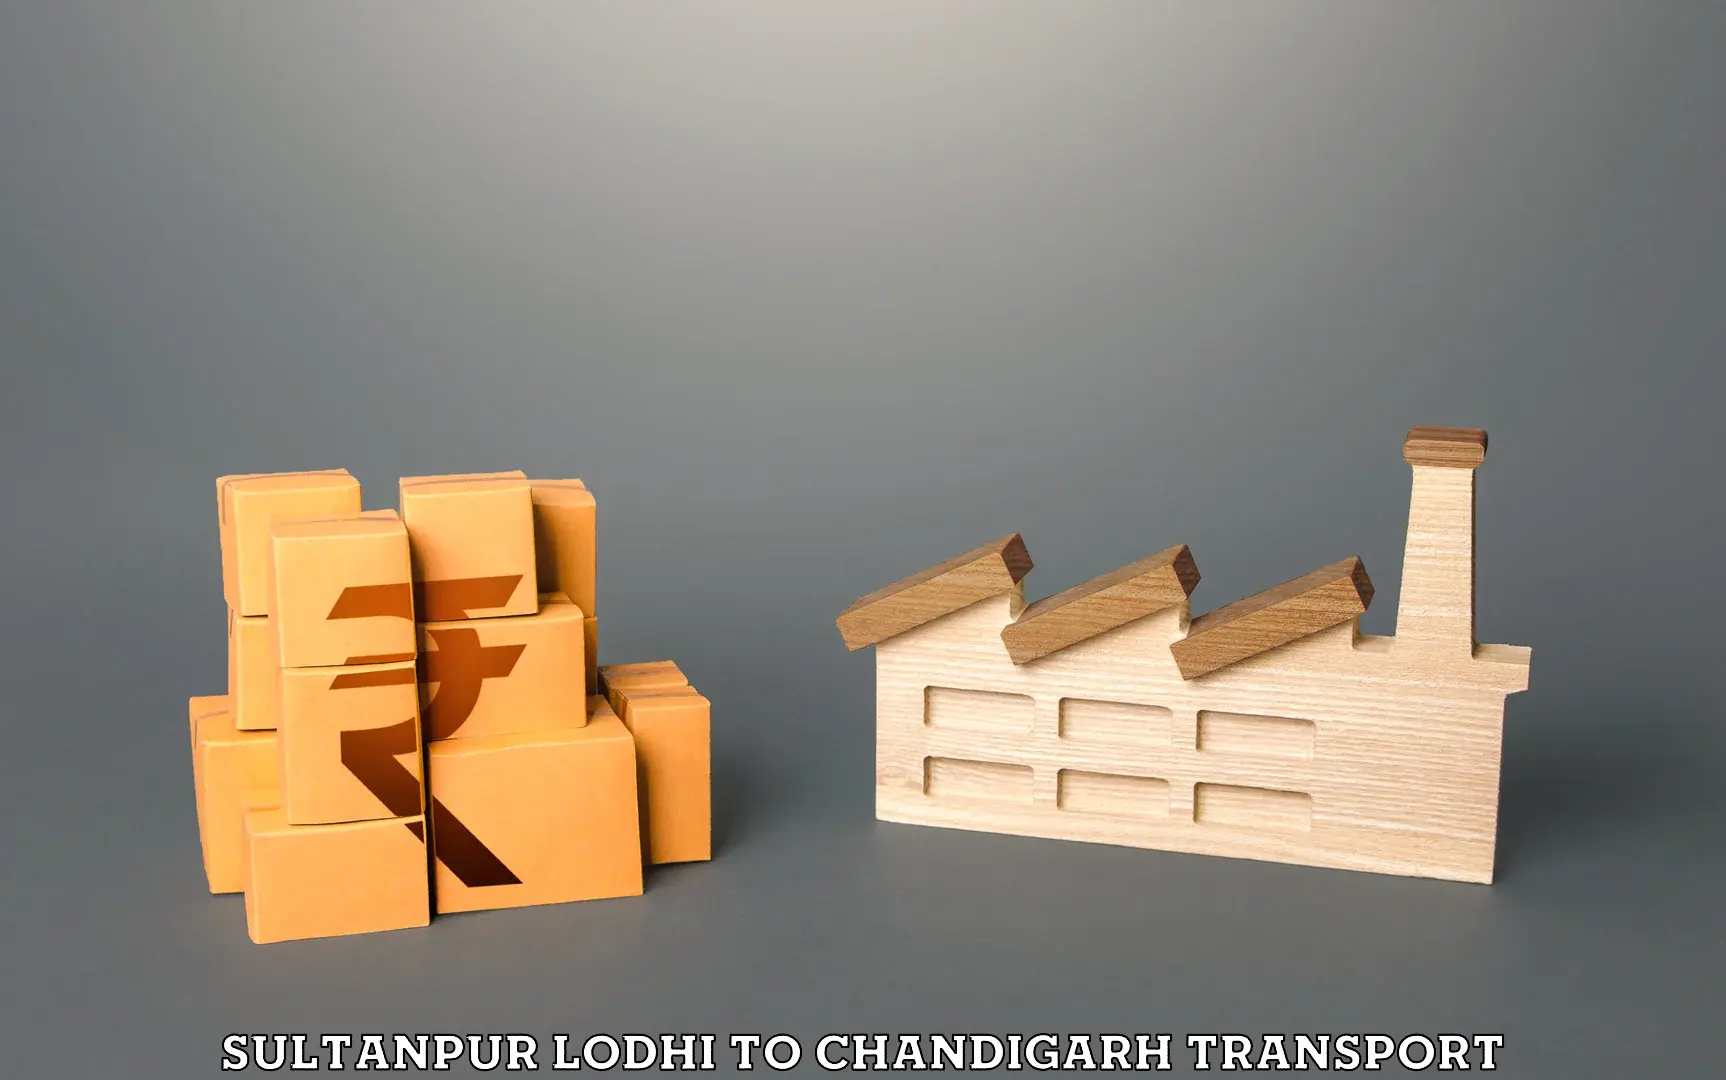 Lorry transport service Sultanpur Lodhi to Chandigarh